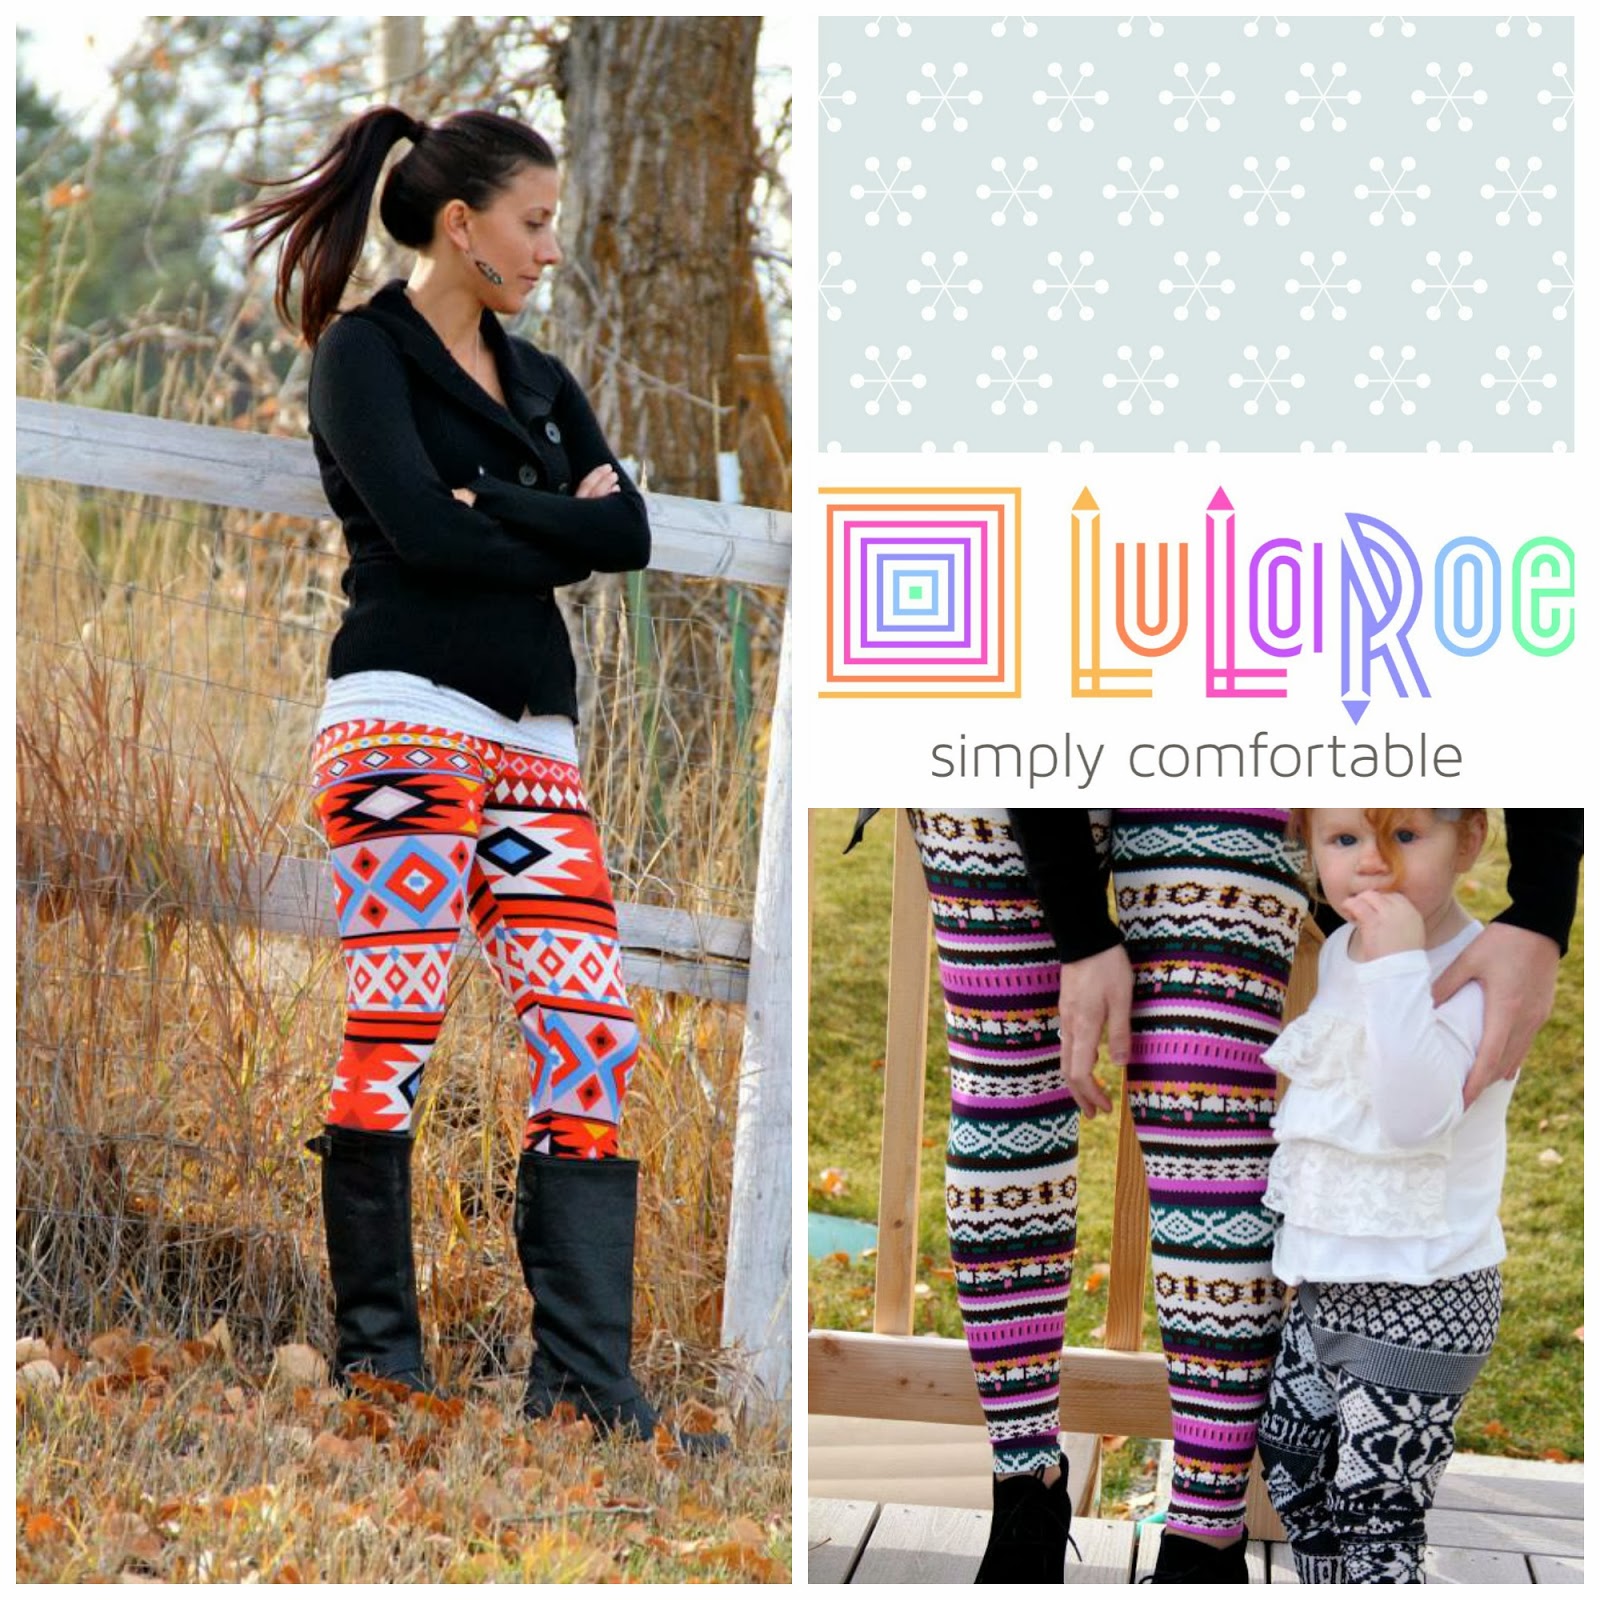 Which Came First Lularoe And Lululemon Leggings